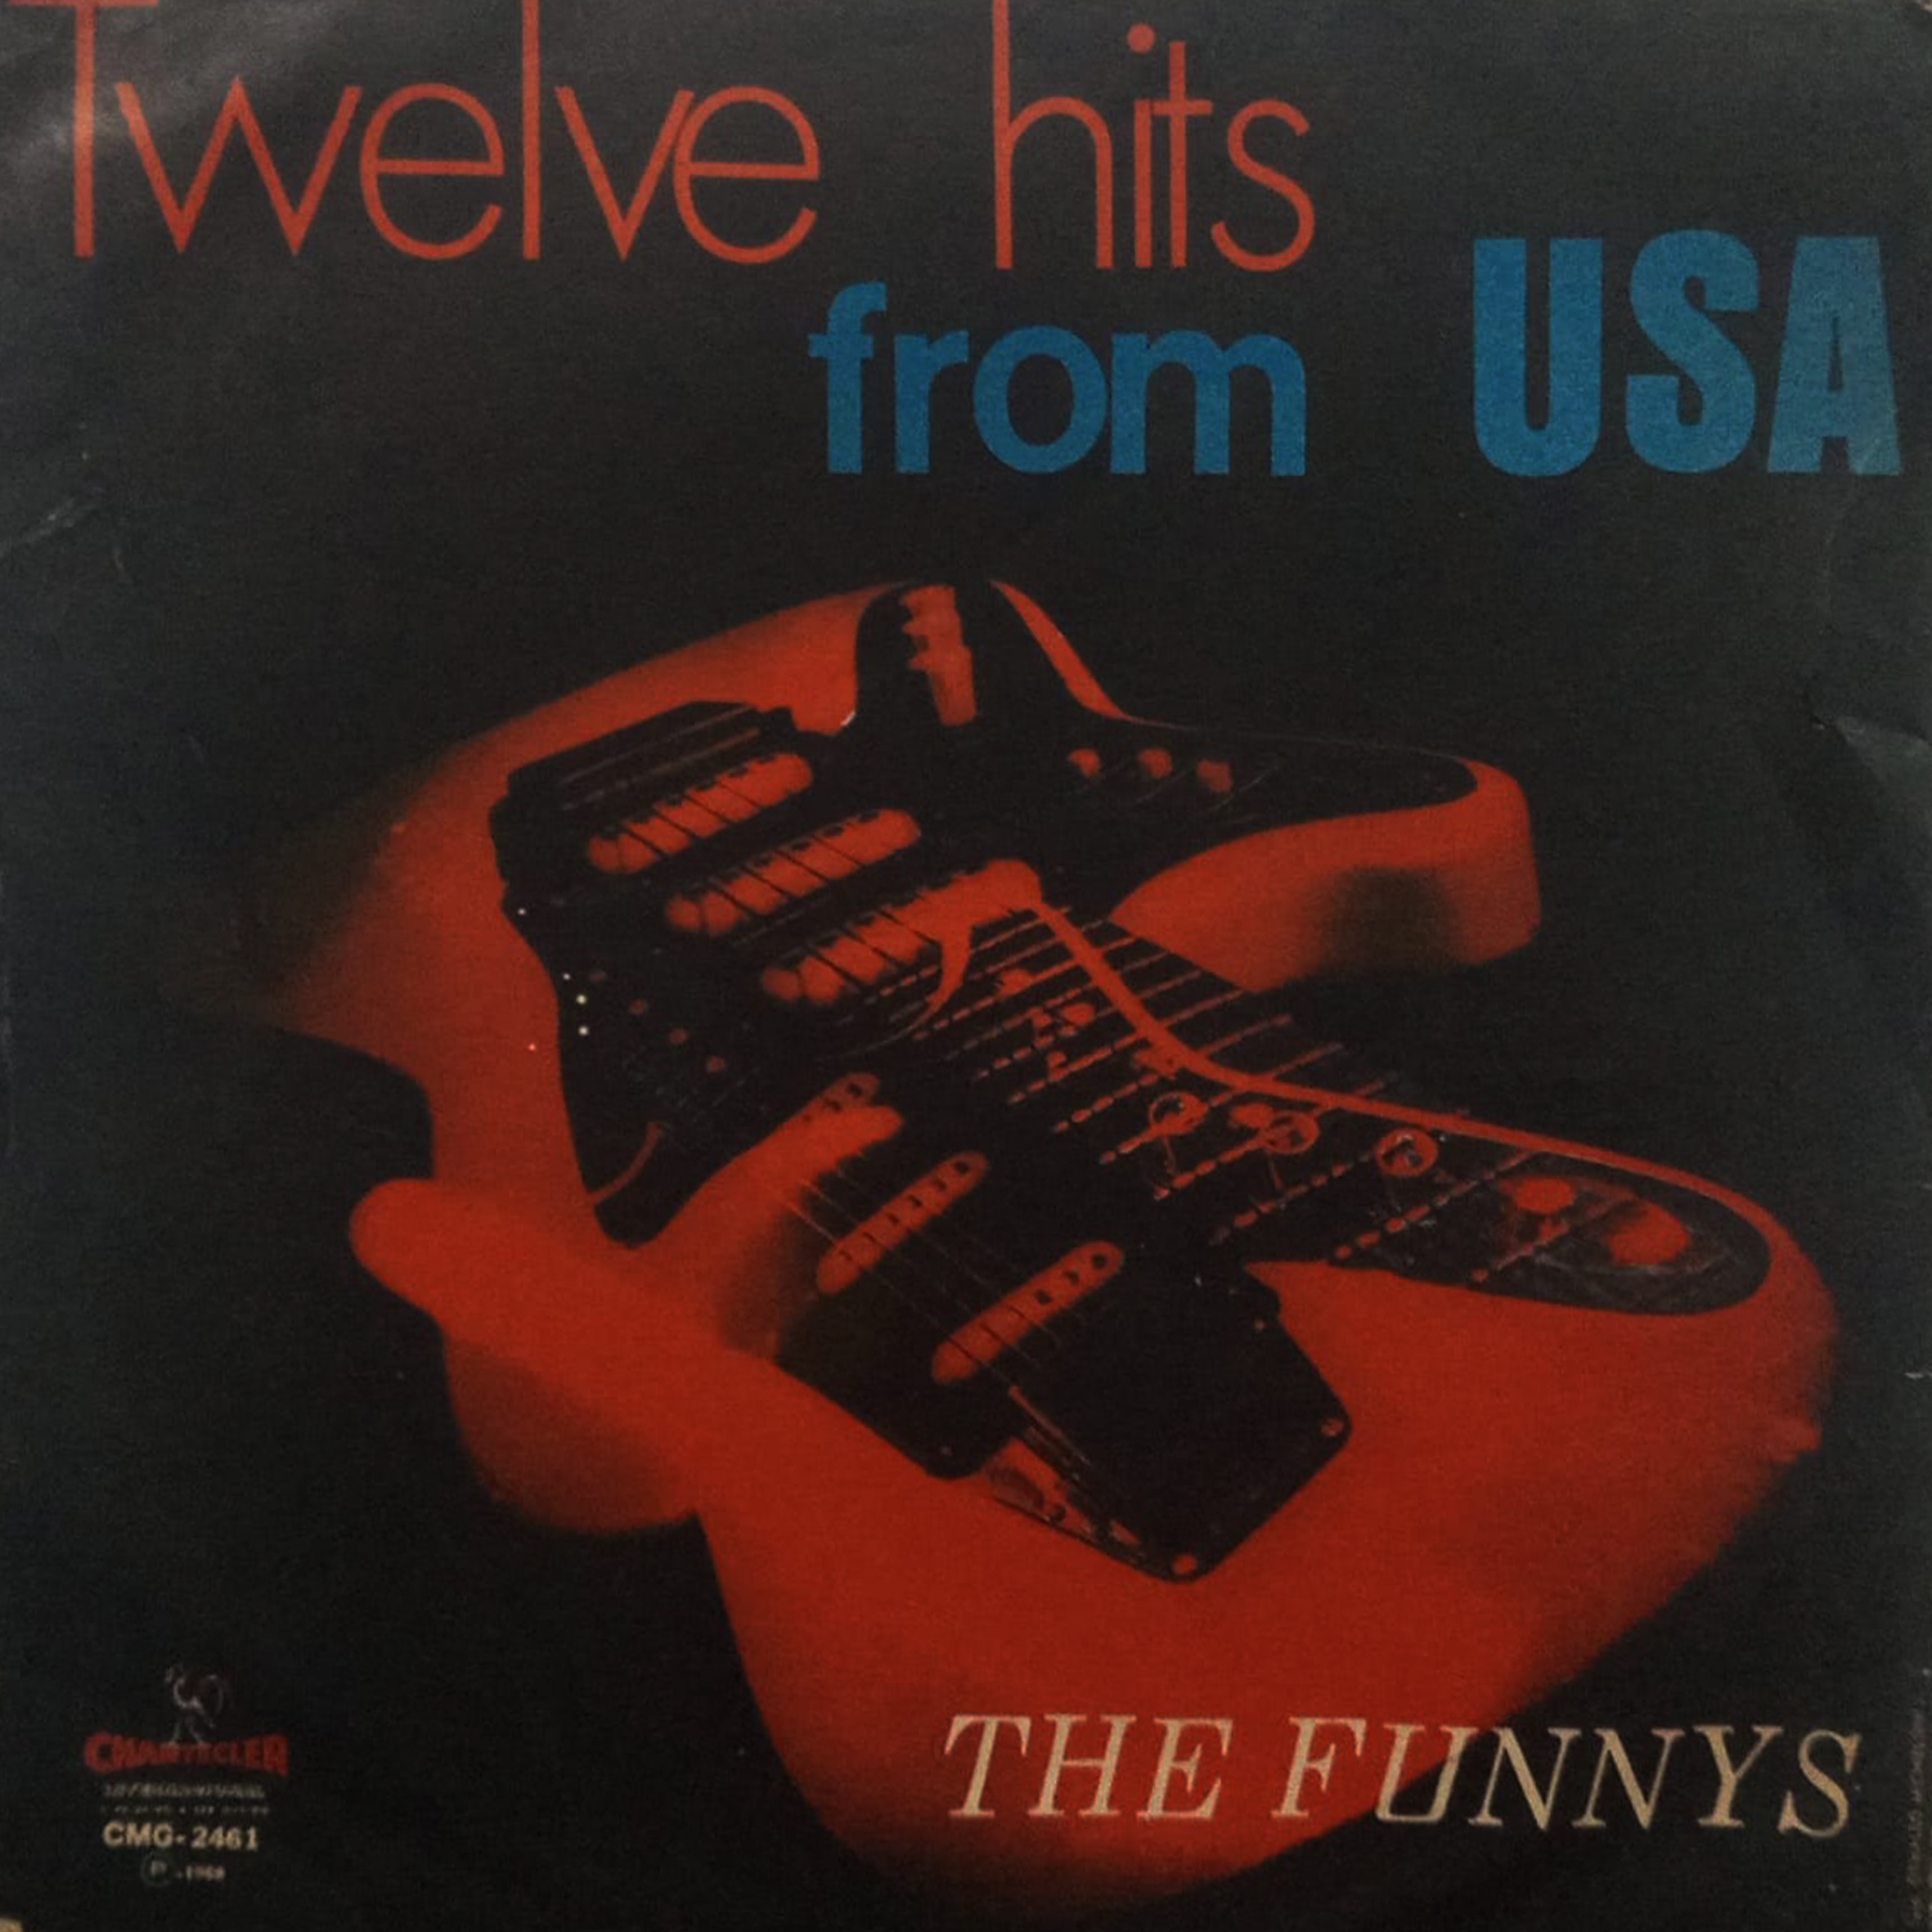 Vinil - Funnys The  - Twelve Hits From USA